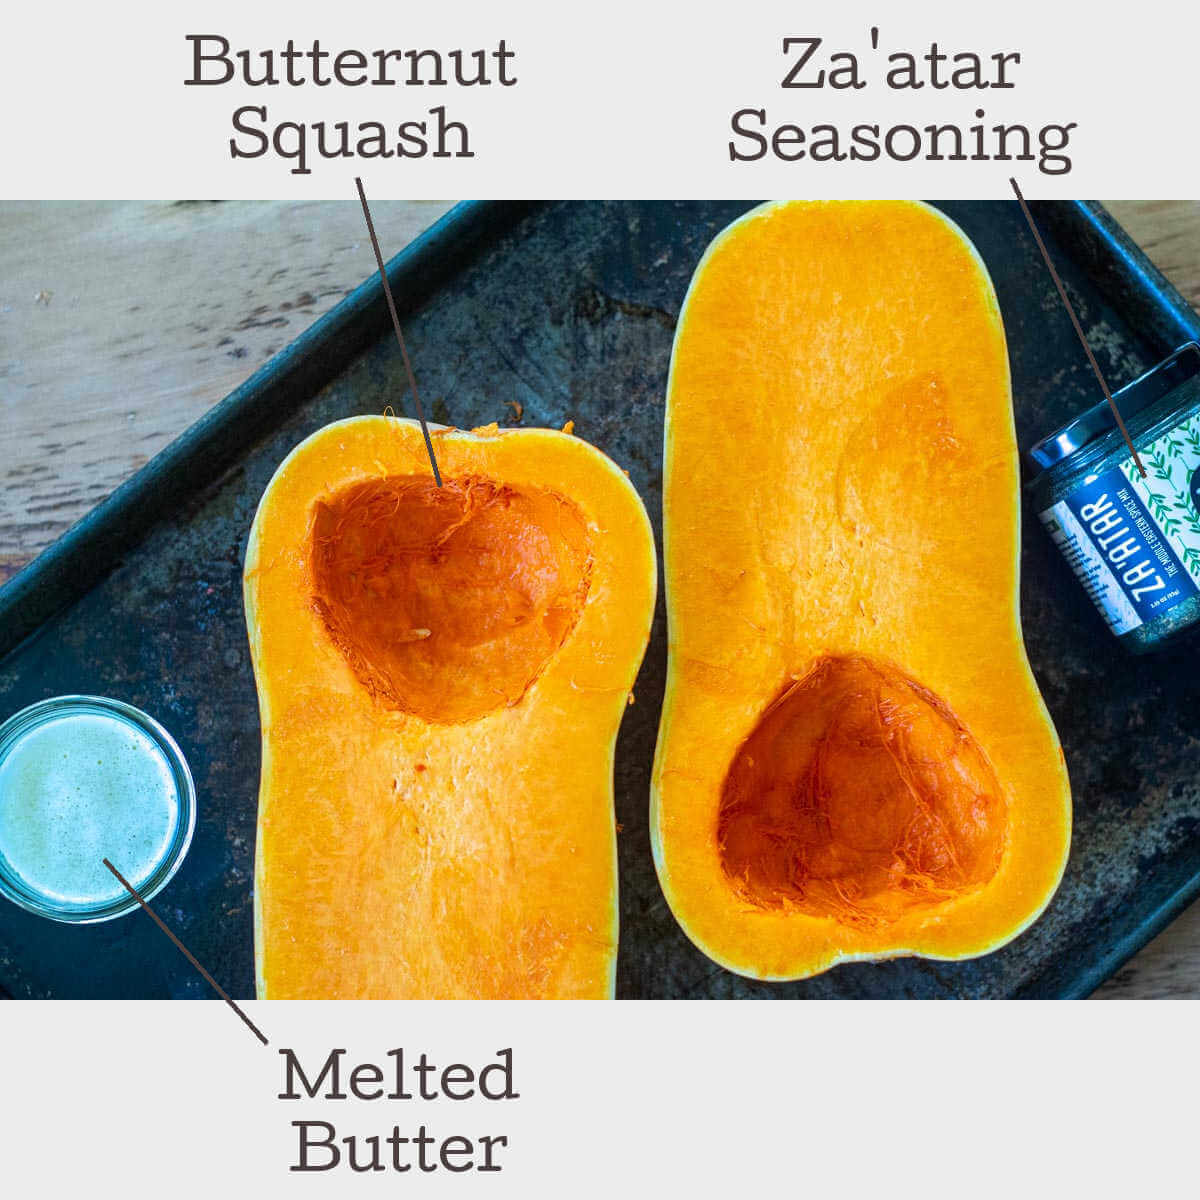 three ingredients for the butternut squash with labels